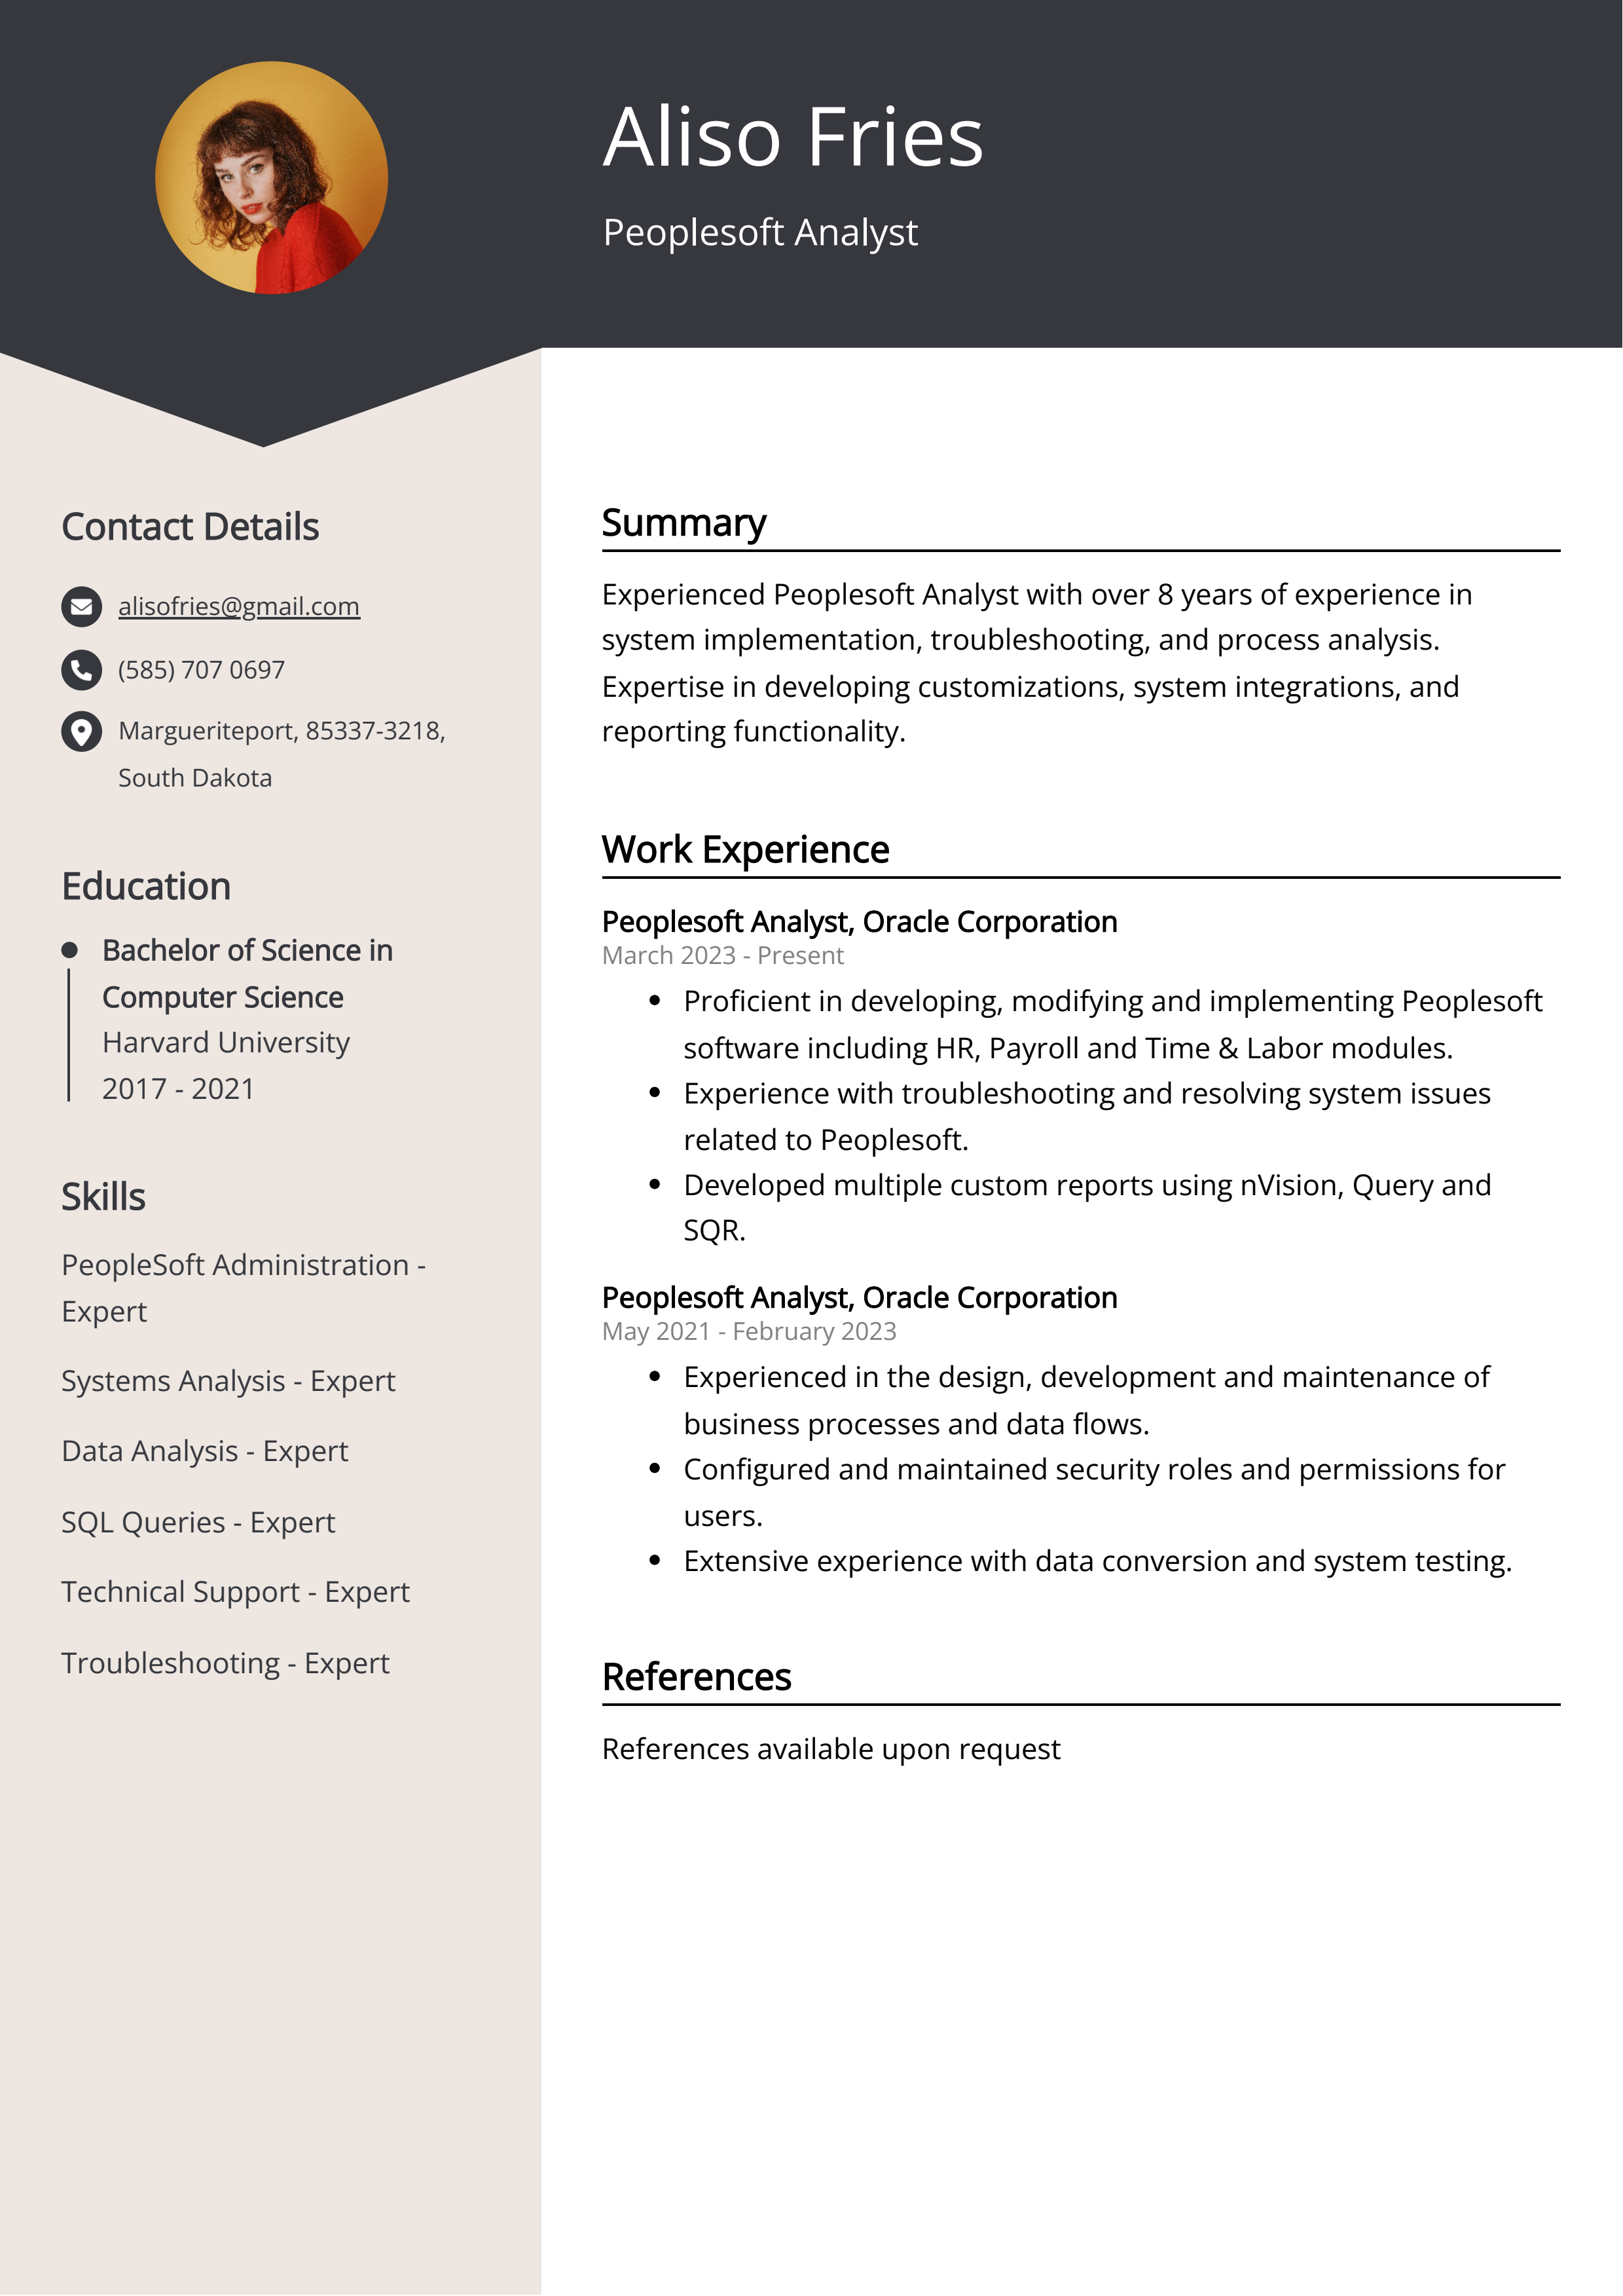 Peoplesoft Analyst CV Example